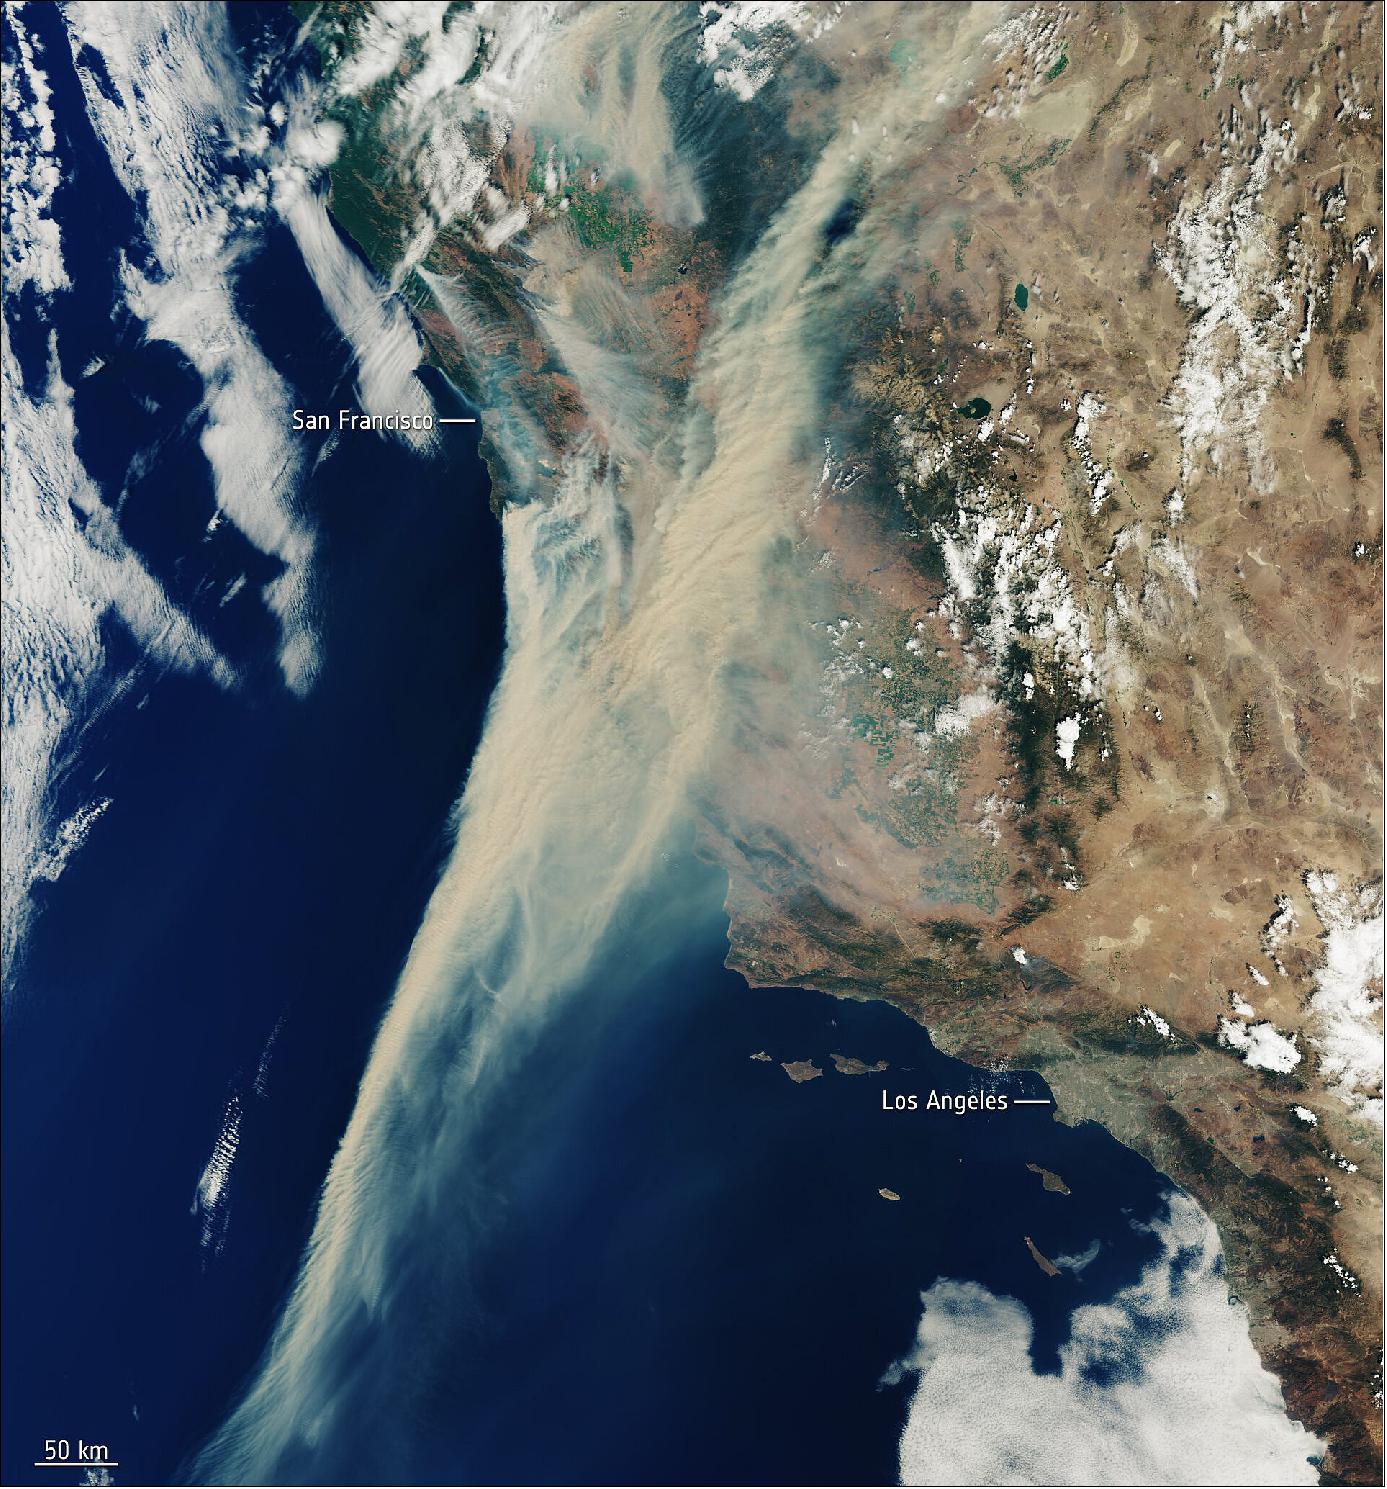 Figure 52: Captured on 19 August 2020, this Copernicus Sentinel-3 image shows the extent of the smoke from fires currently ablaze in California, USA (image credit: ESA, the image contains Copernicus Sentinel (2020), processed by ESA, CC BY-SA 3.0 IGO)